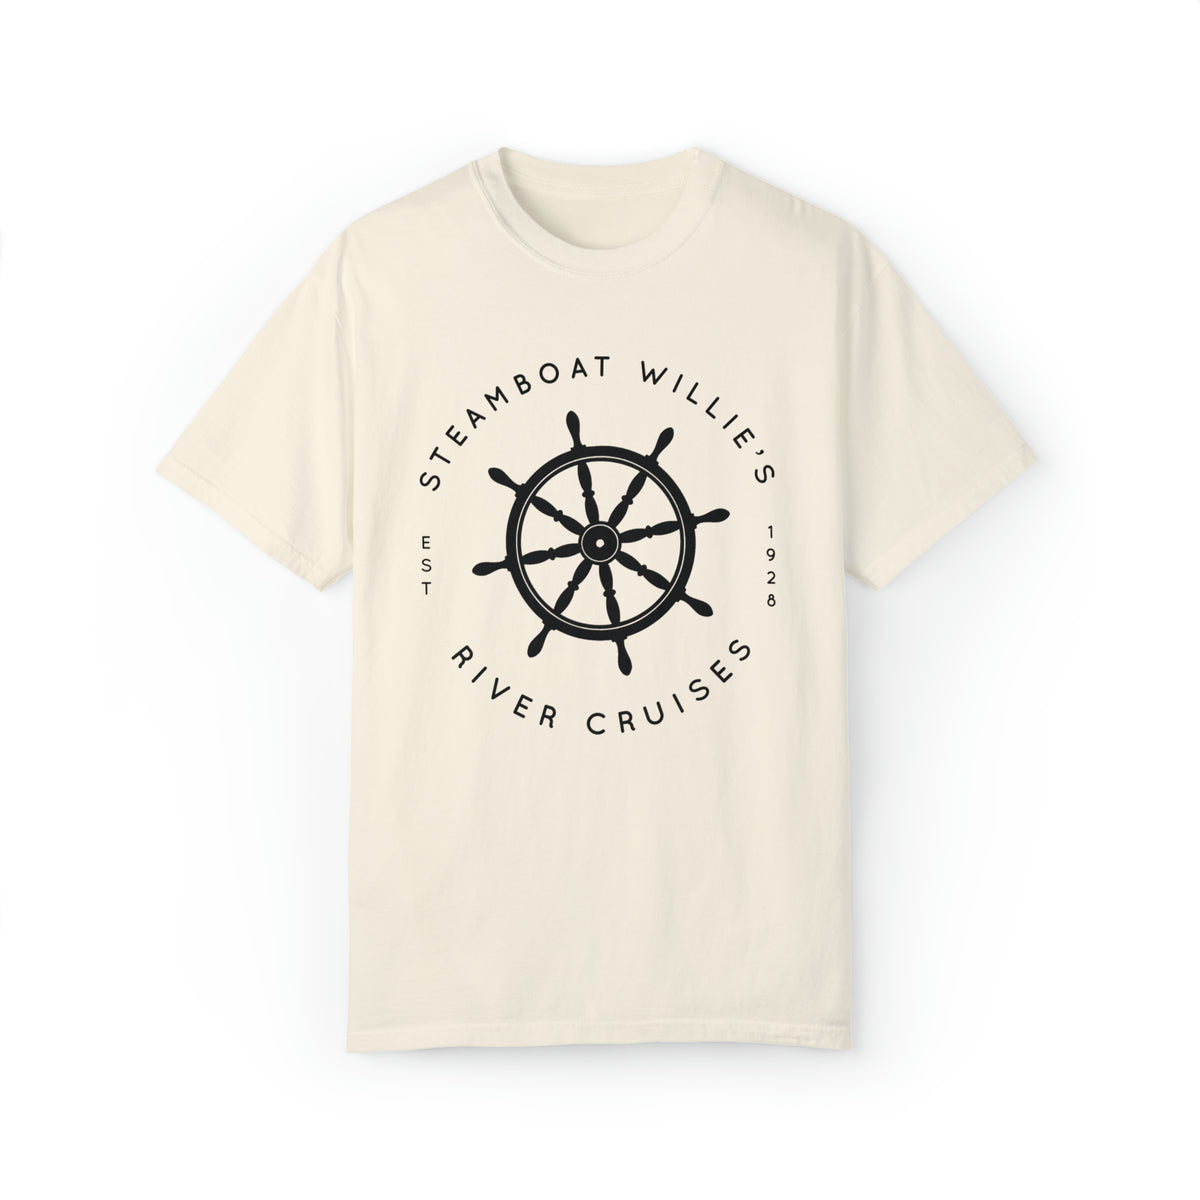 Steamboat Willie's River Cruises Comfort Colors Unisex Garment-Dyed T-shirt